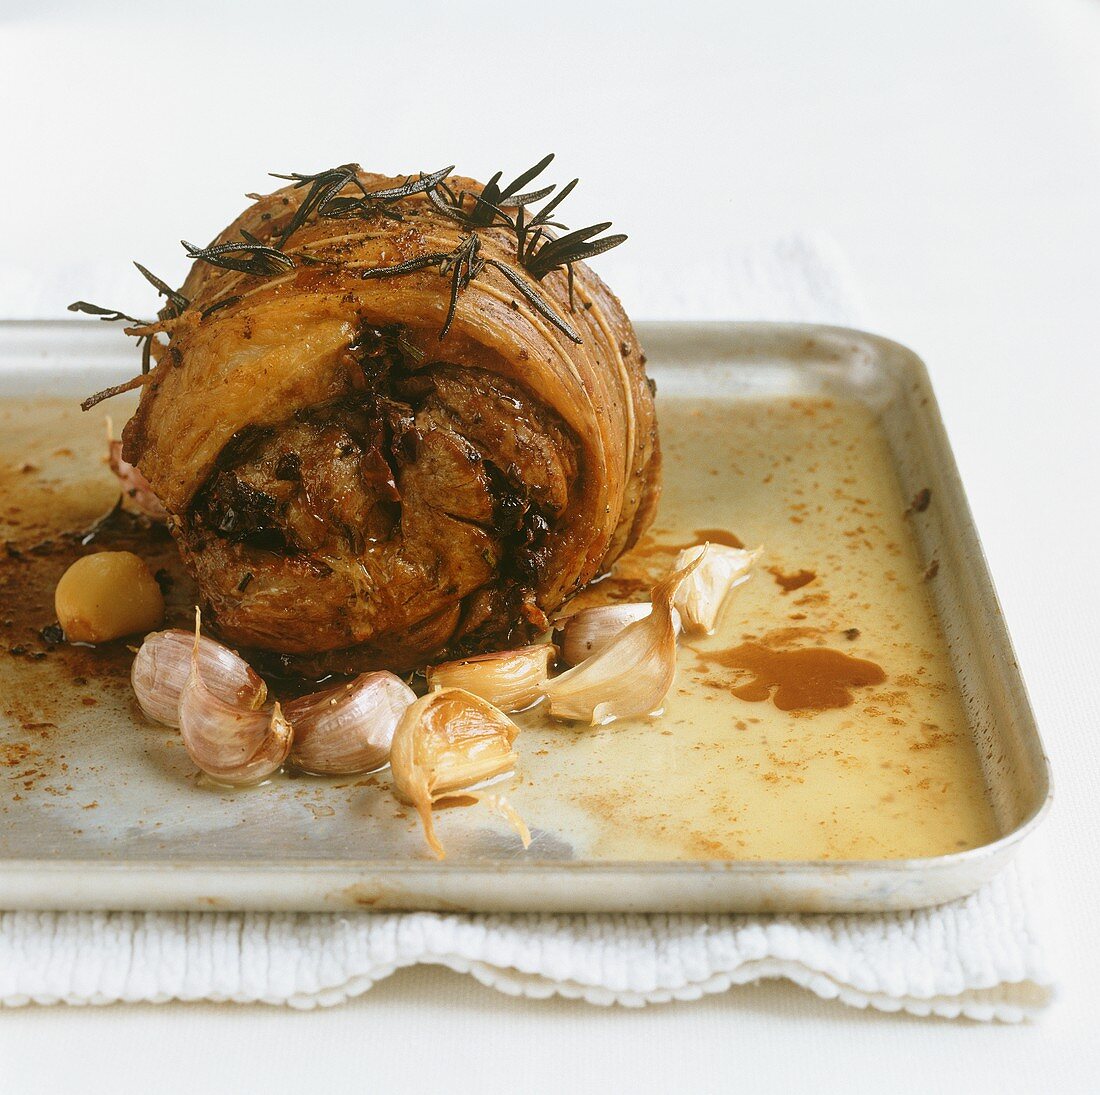 Pork roulade with garlic on a baking tray